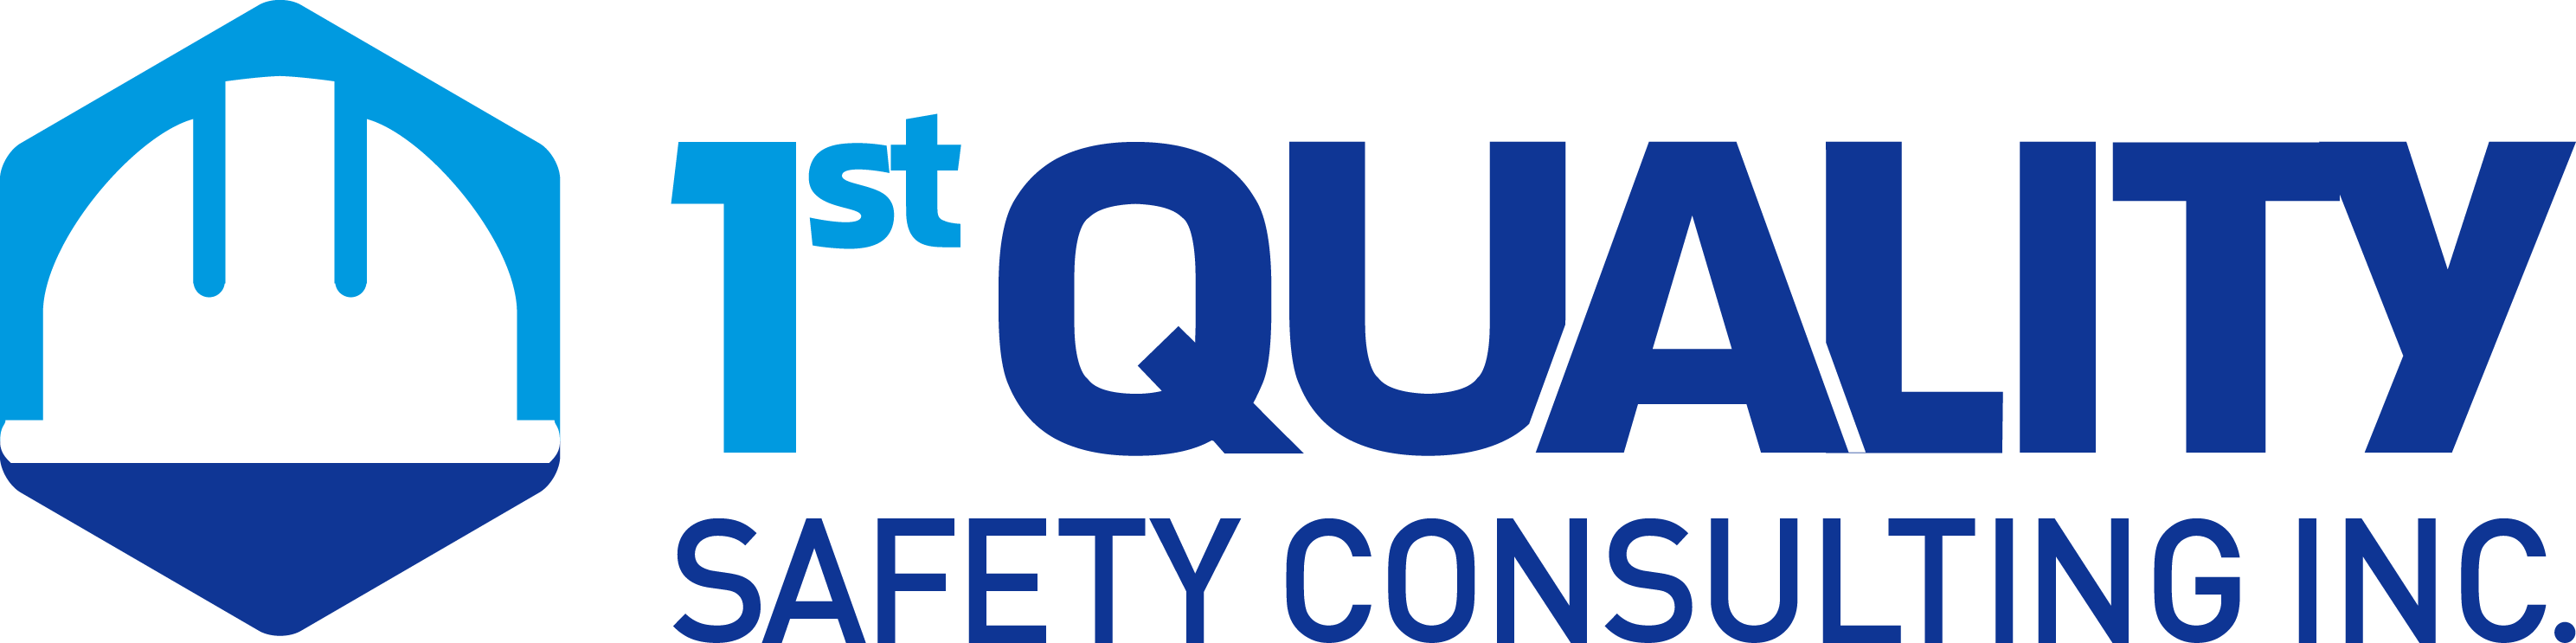 1st Quality Safety Consulting Inc.